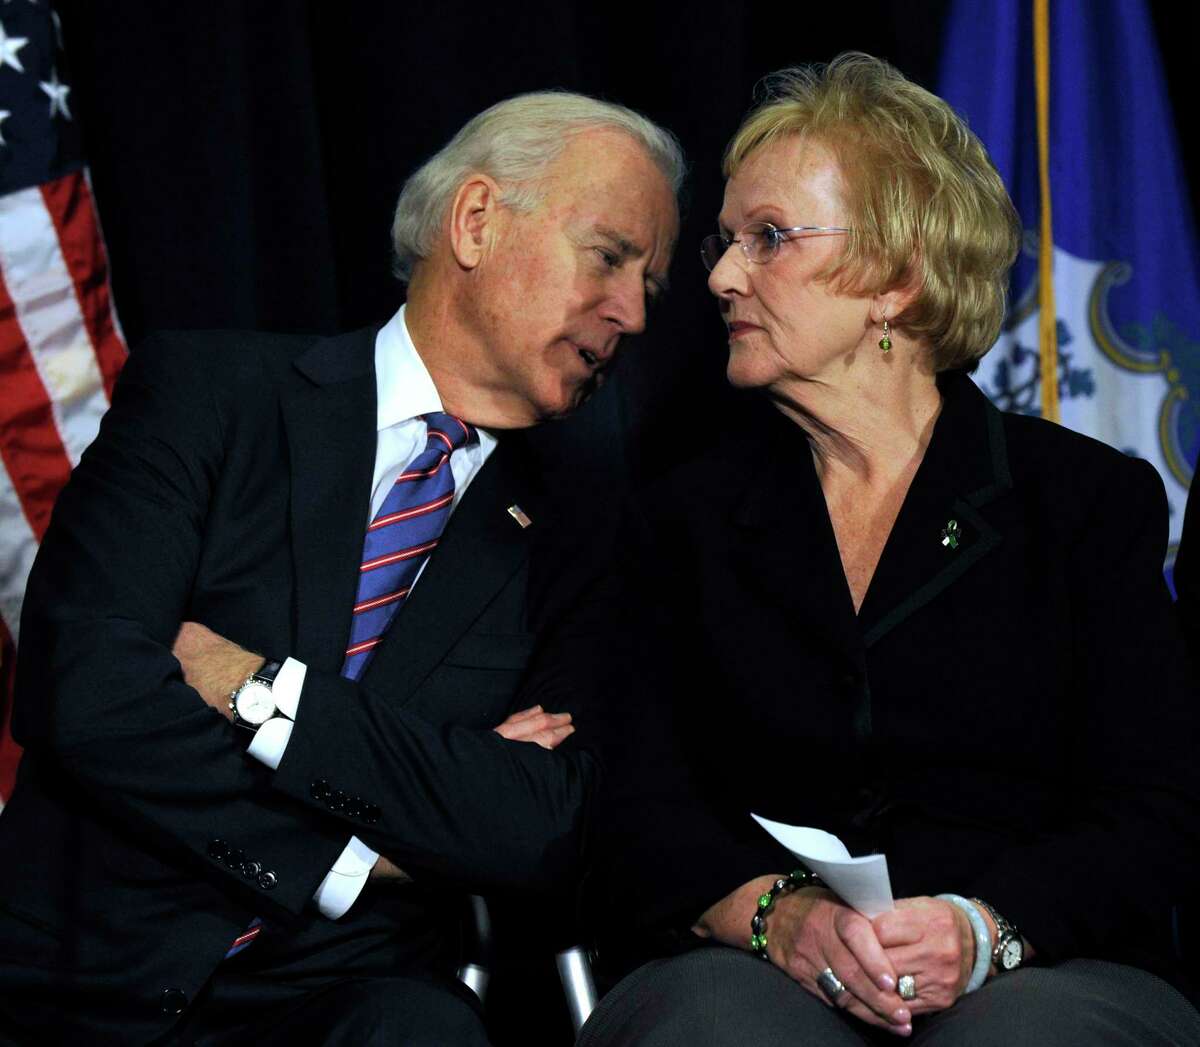 Then-Vice President Joe Biden has a word with Newtown First Selectman Pat Llodra before speaking at a conference on gun violence at Western Connecticut State University in Danbury, Conn., Thursday, Feb. 21, 2013.